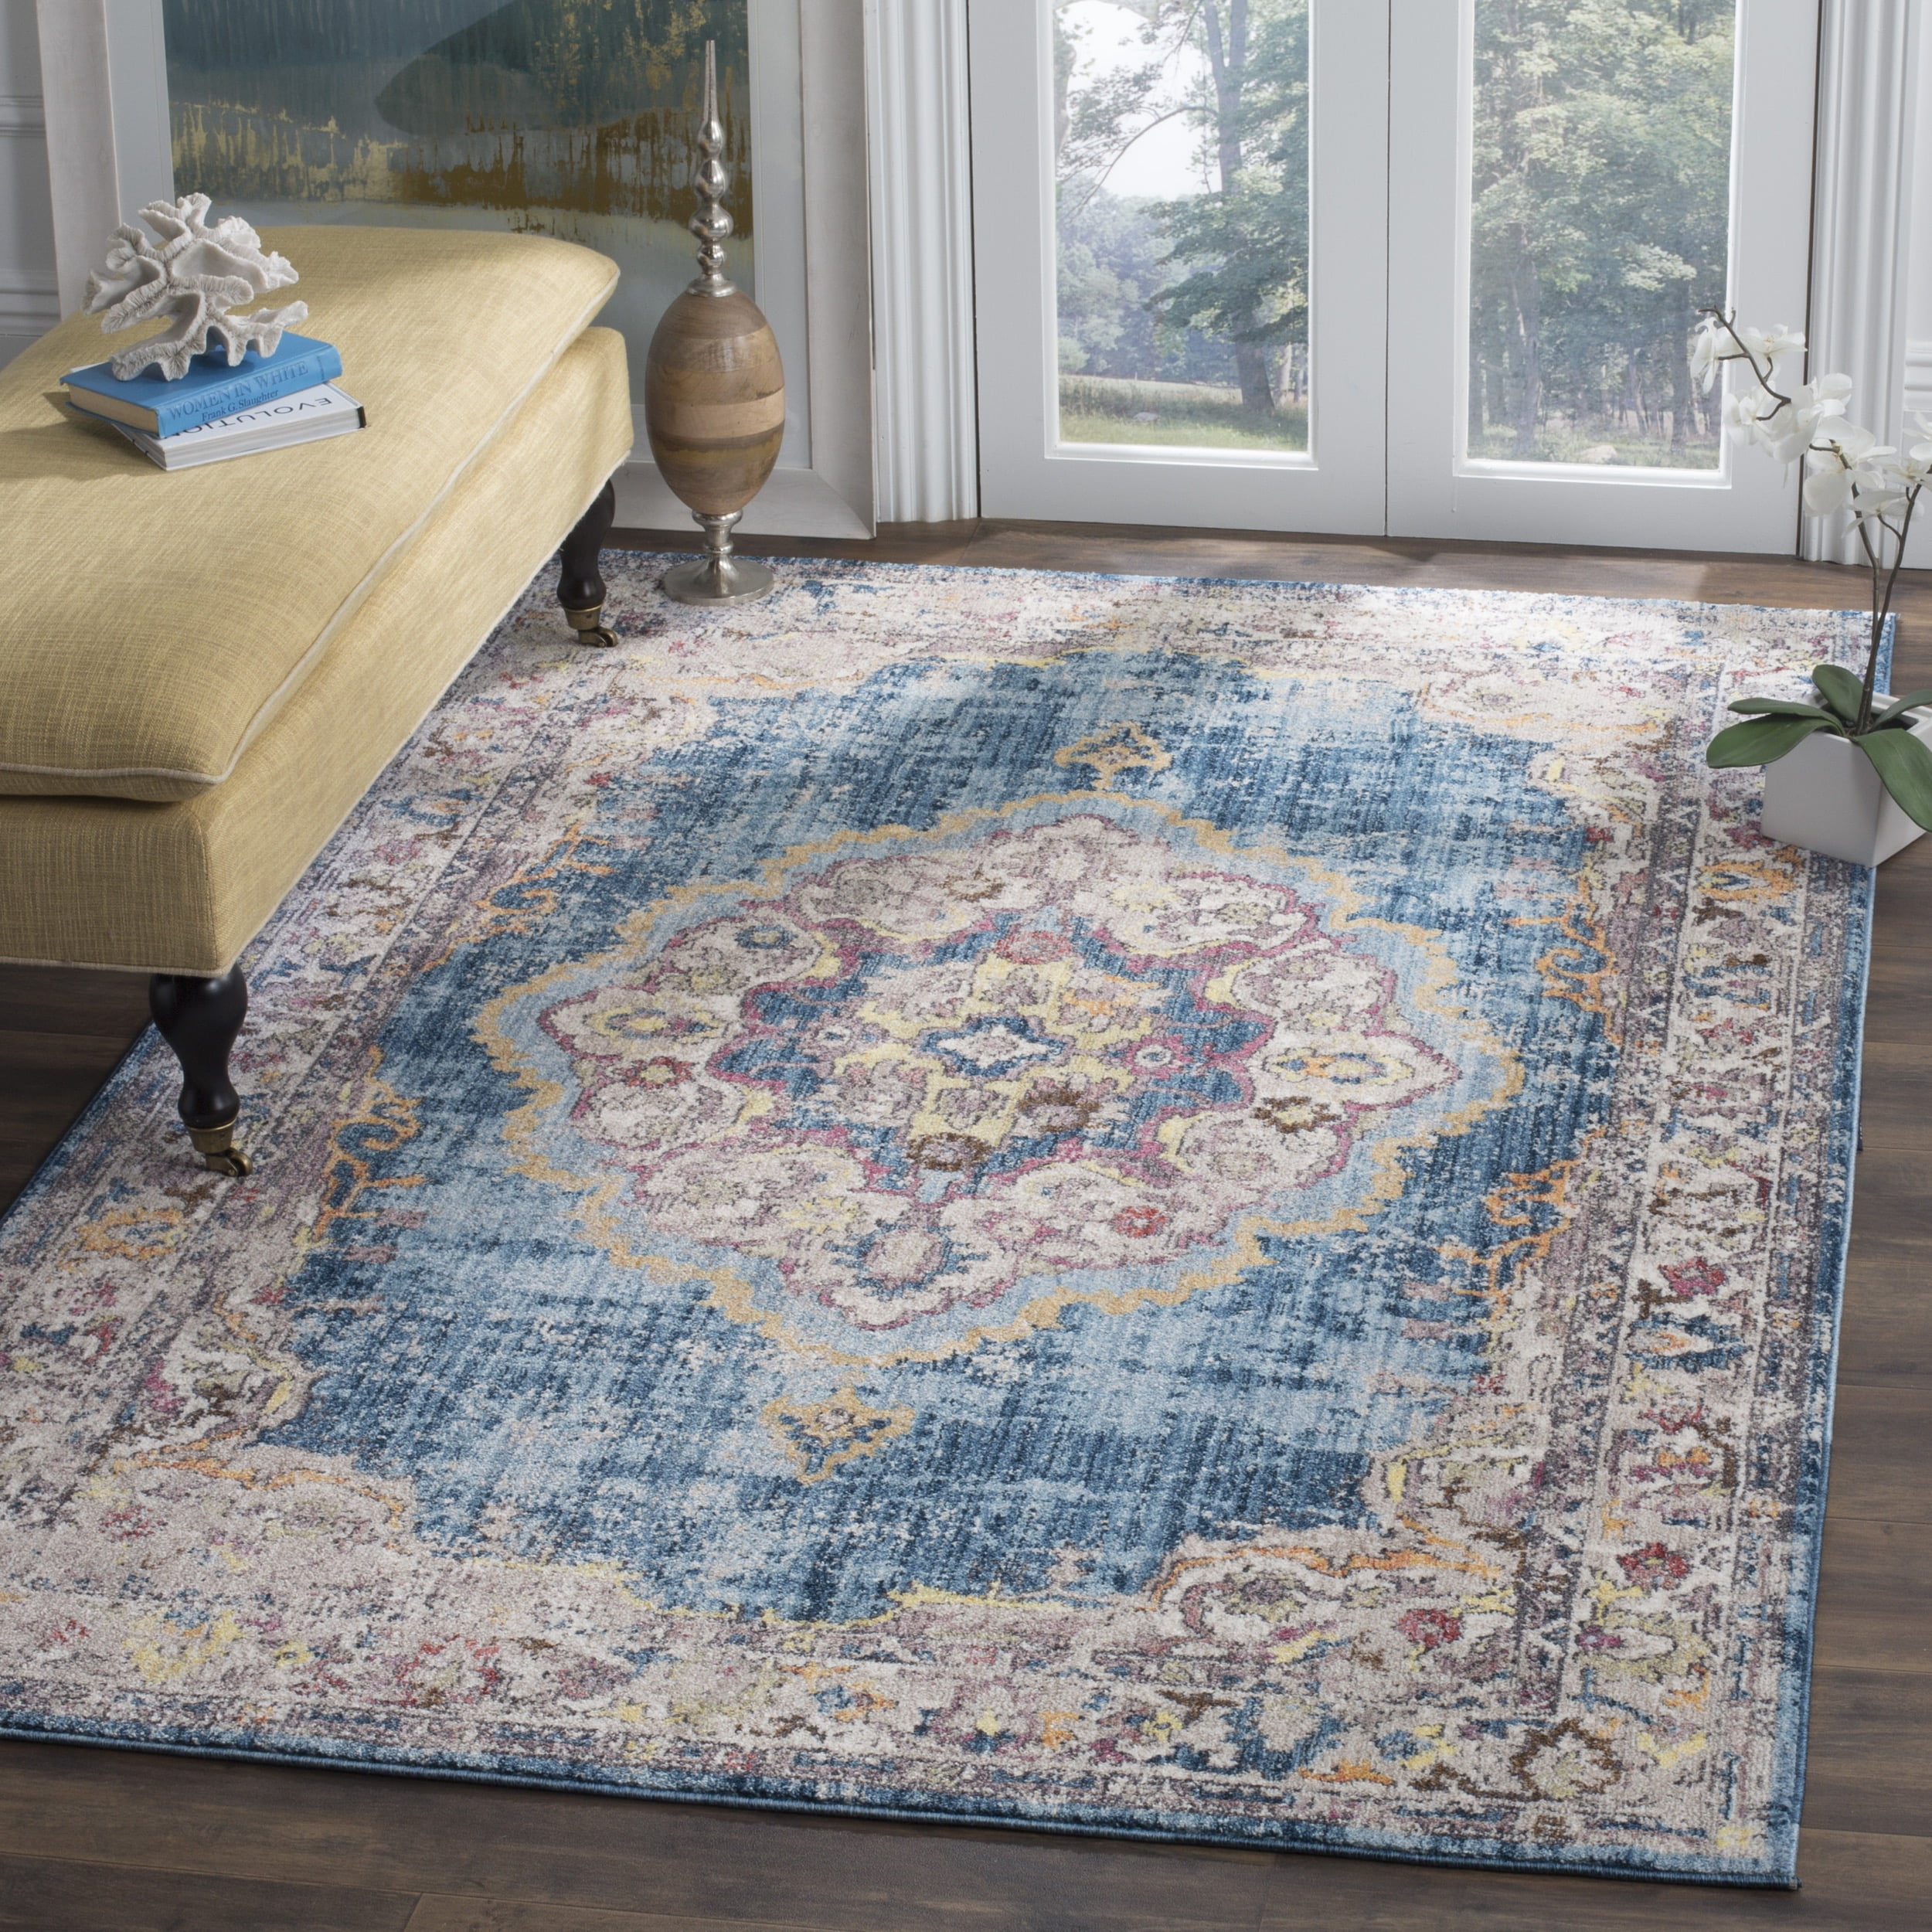 Details about   Antique Rooms Rugs Medallion Wool/Jute Natural VintageTraditional Area Hand Rags 